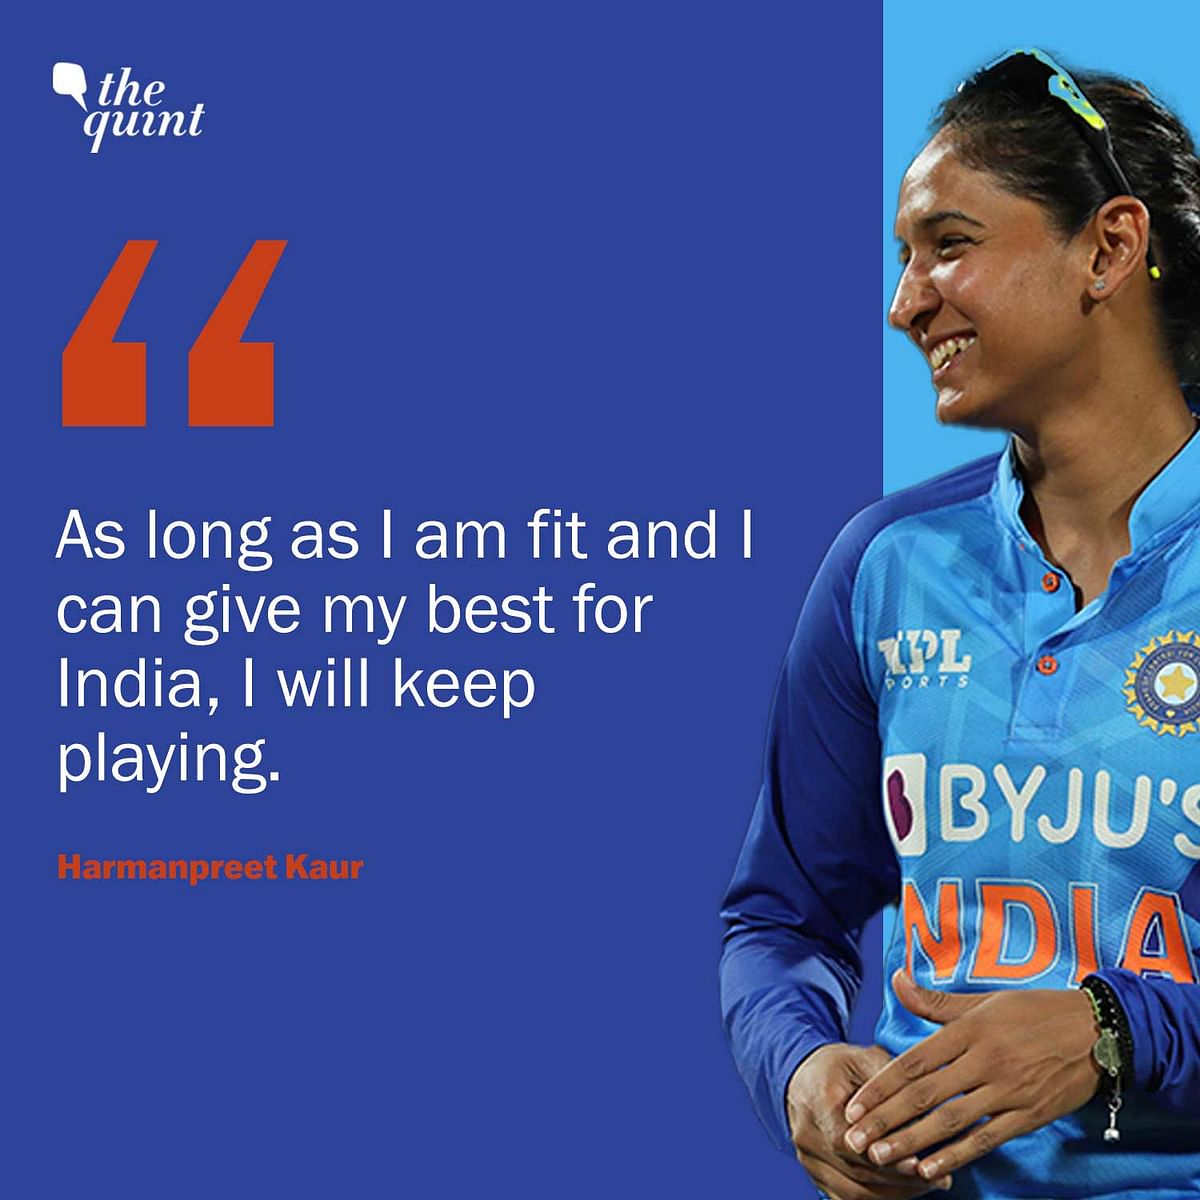 Will we see #HarmanpreetKaur playing at the 2028 #Olympics? How can #WPL get better?

The captain answers.